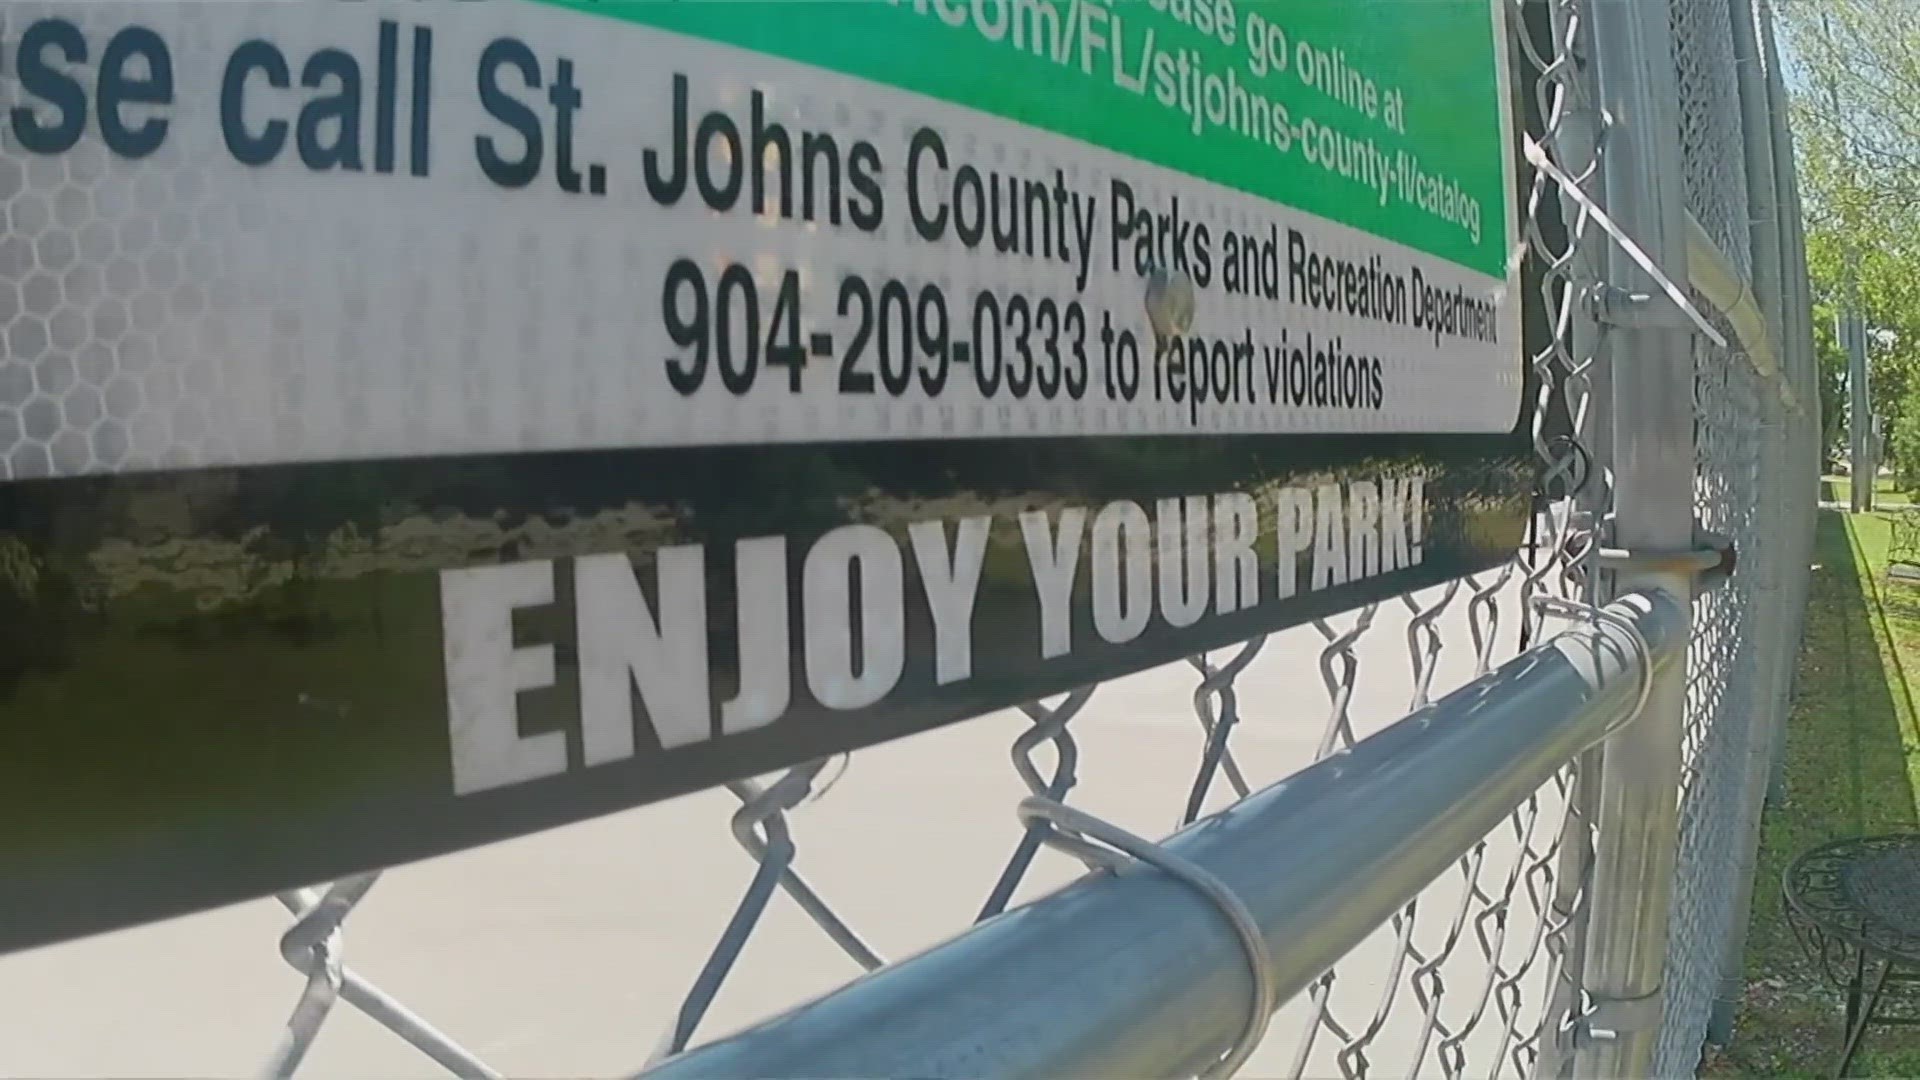 St. Johns County officials say the thousands of dollars they could've spent on upgrades and public events, went towards fixing and cleaning vandalized property.